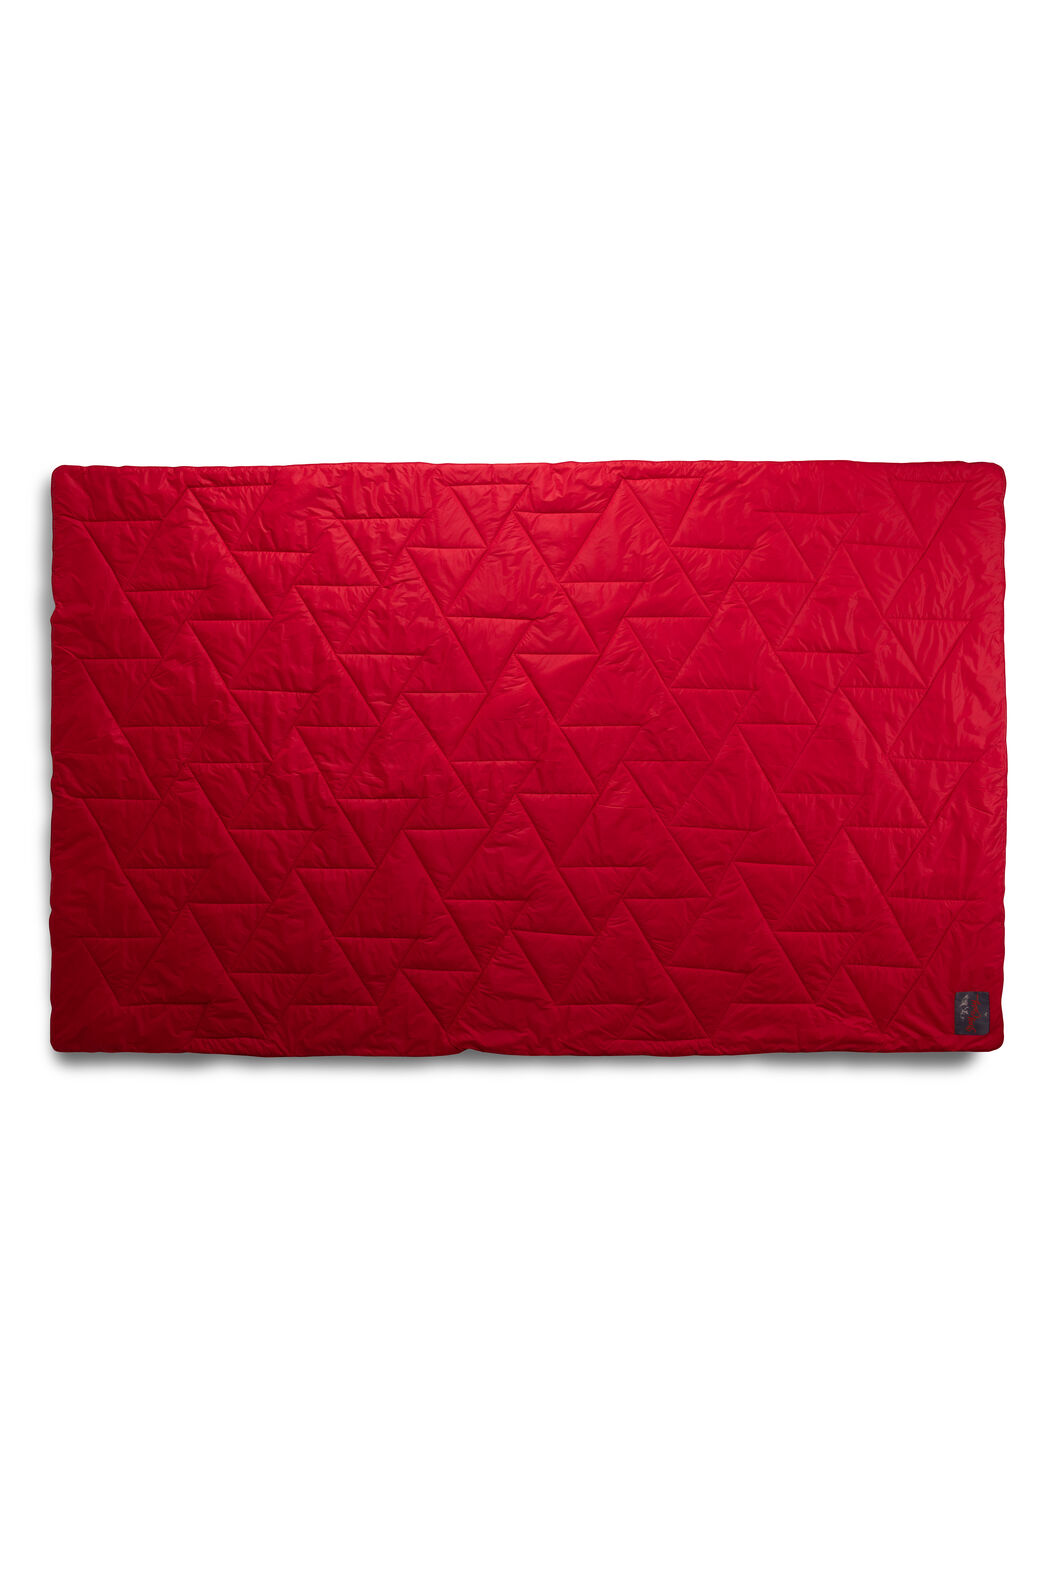 Macpac Uber Synthetic Quilt, TOMATO, hi-res